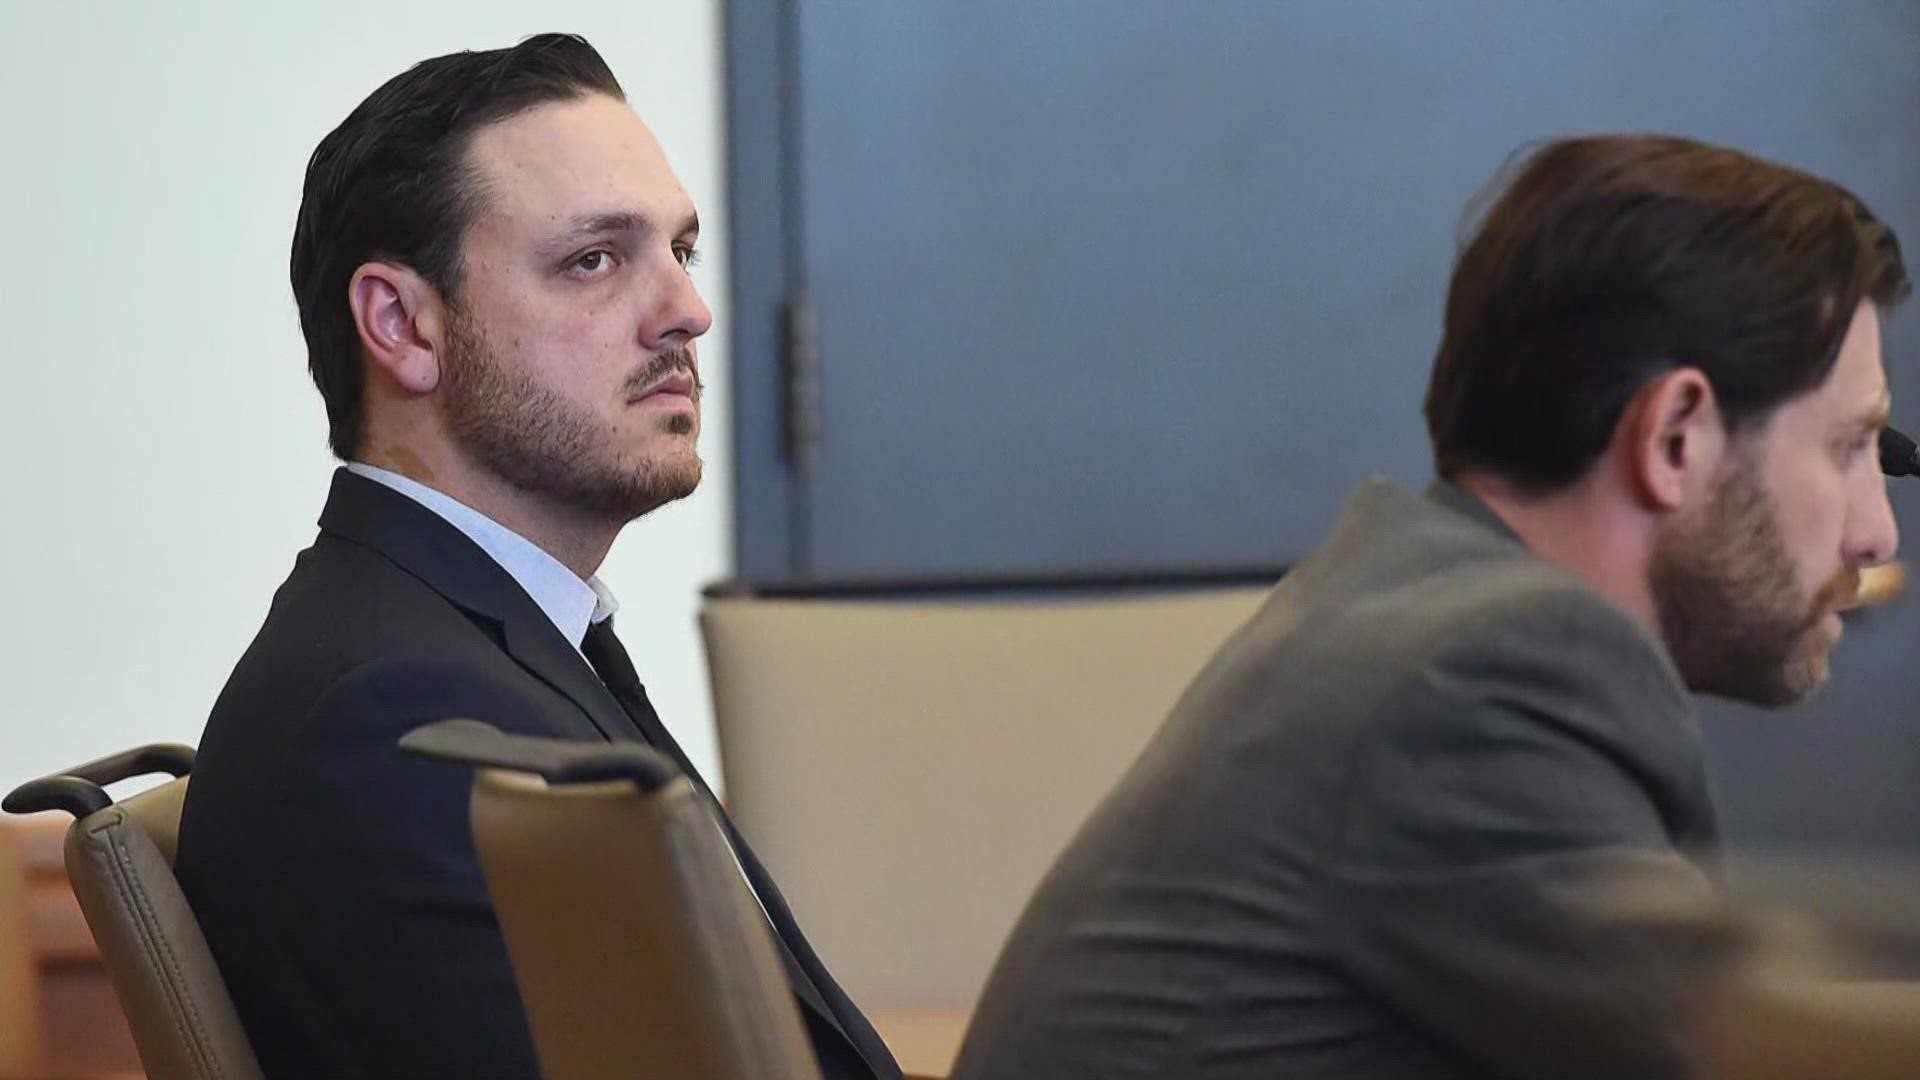 Austin Hopp pleaded guilty in March to an assault charge despite opposition from Garner's family.